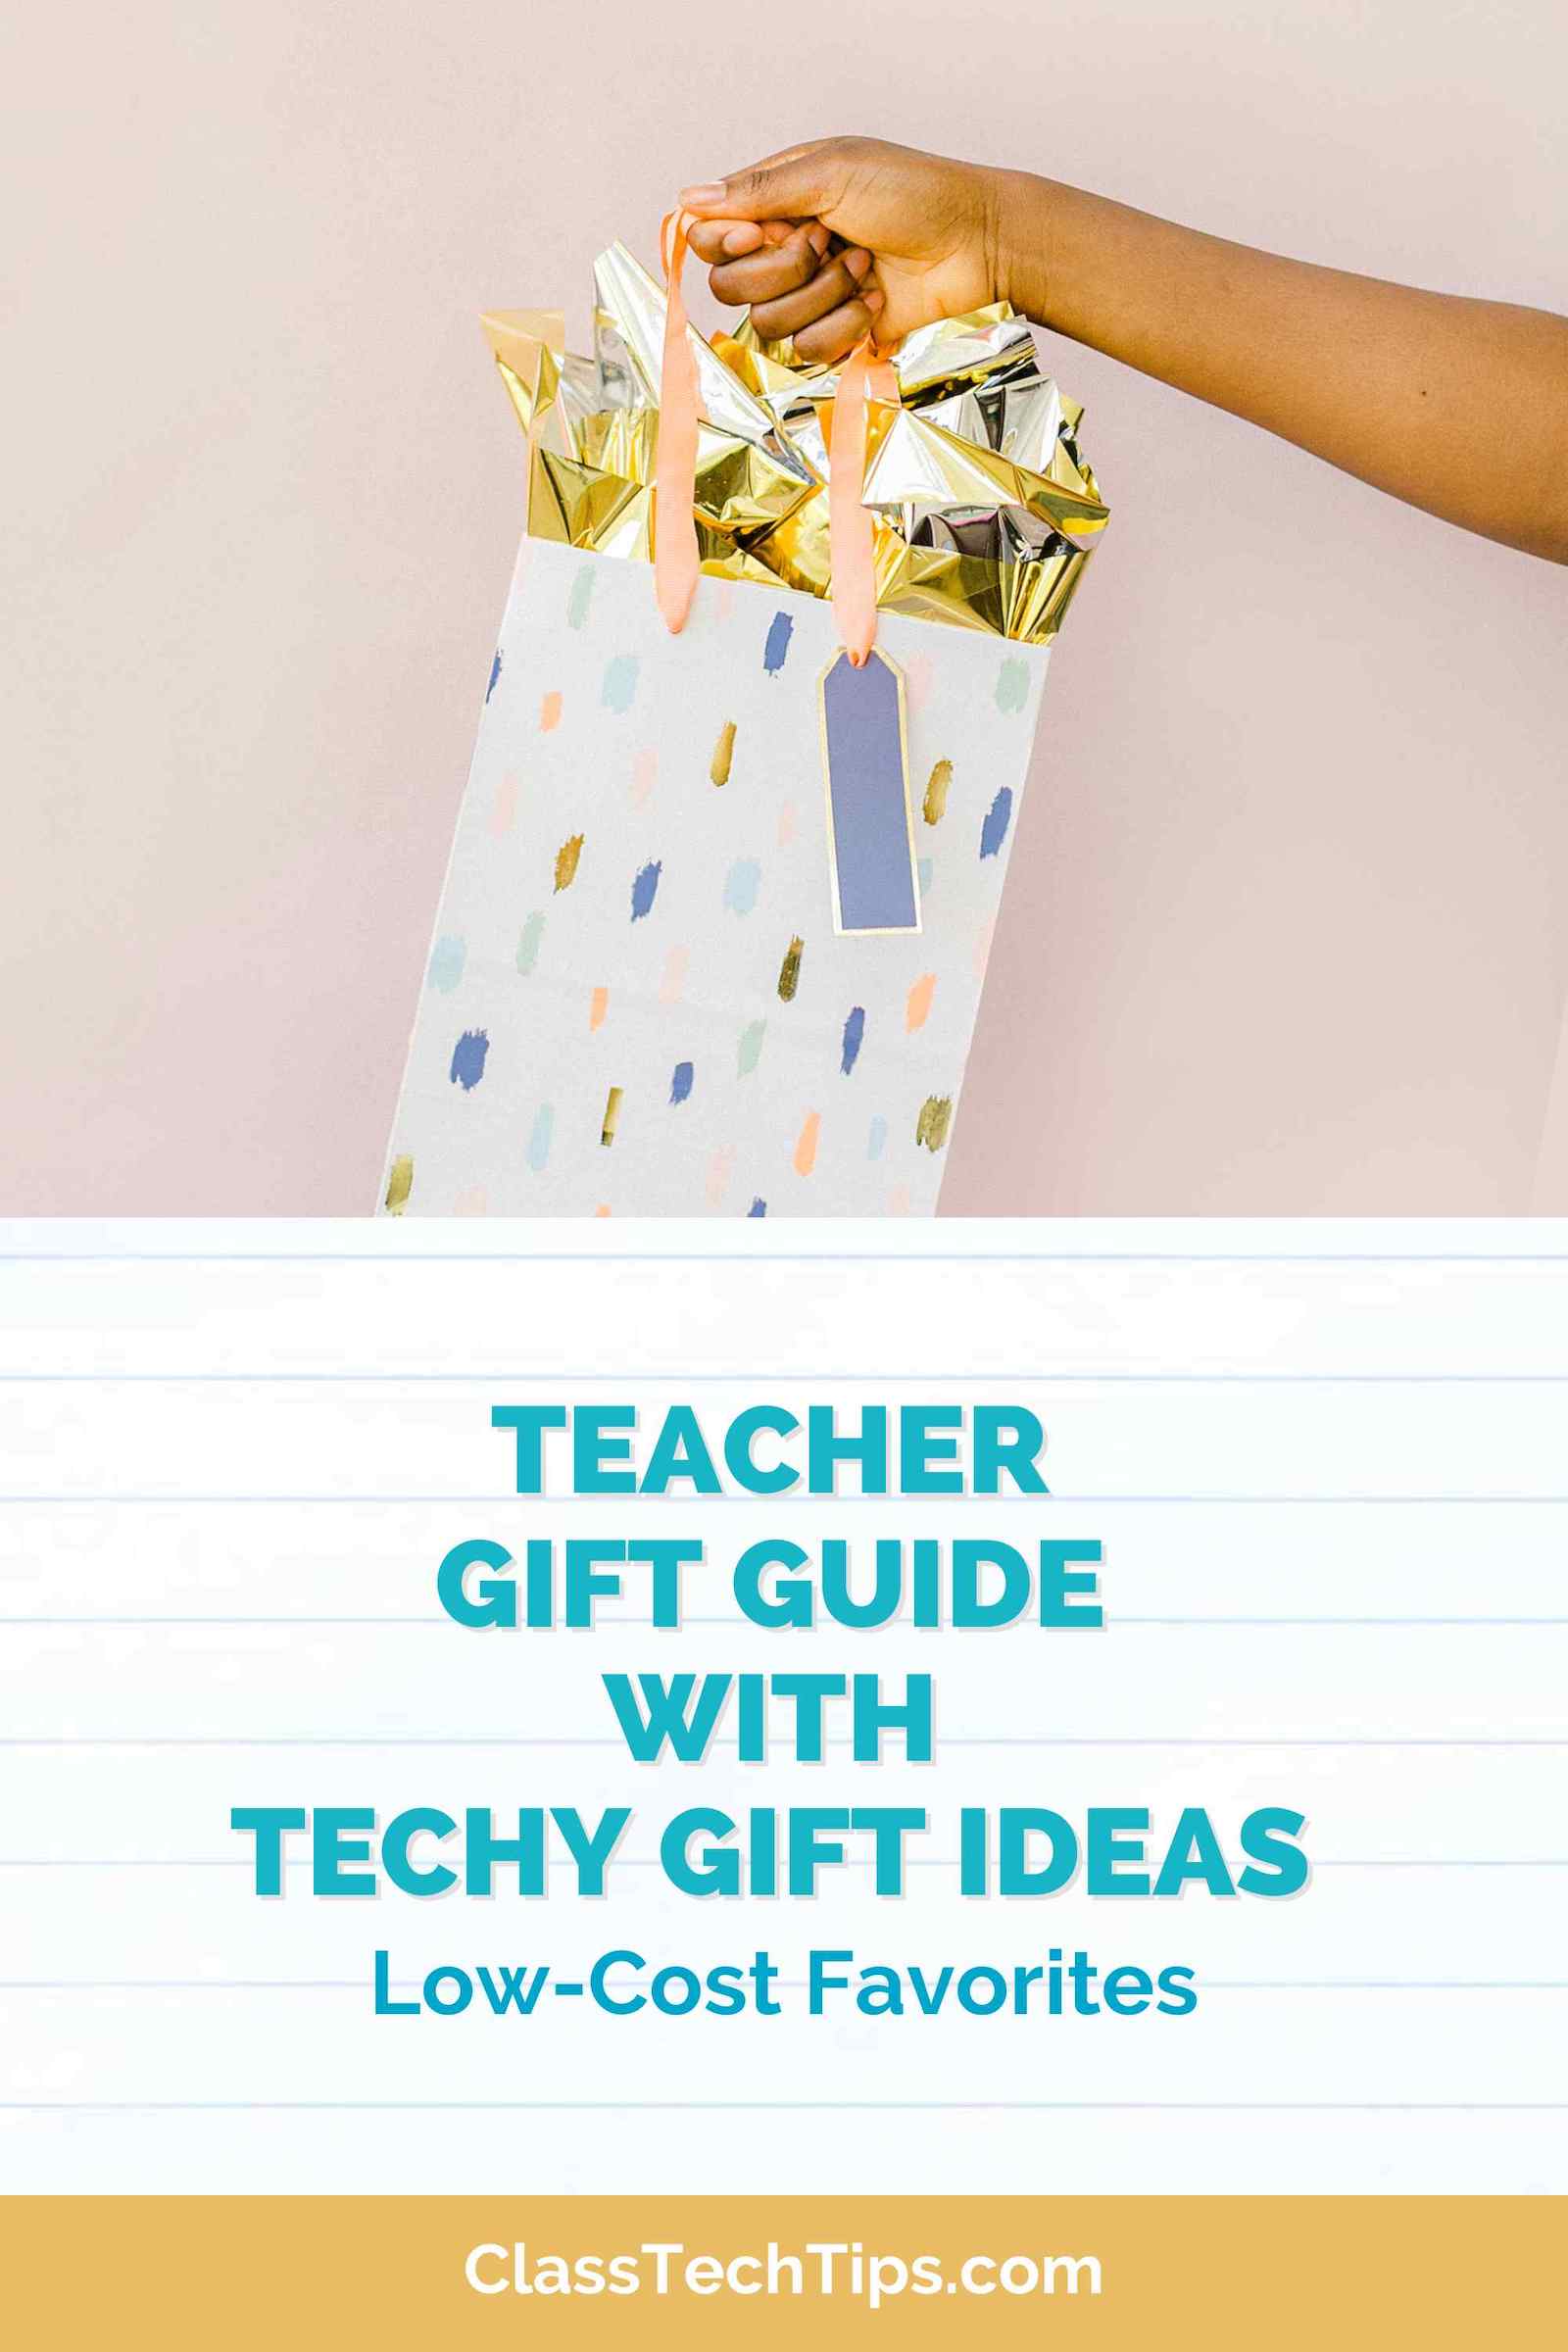 Teacher-Gift-Guide-with-Techy-Gift-Ideas